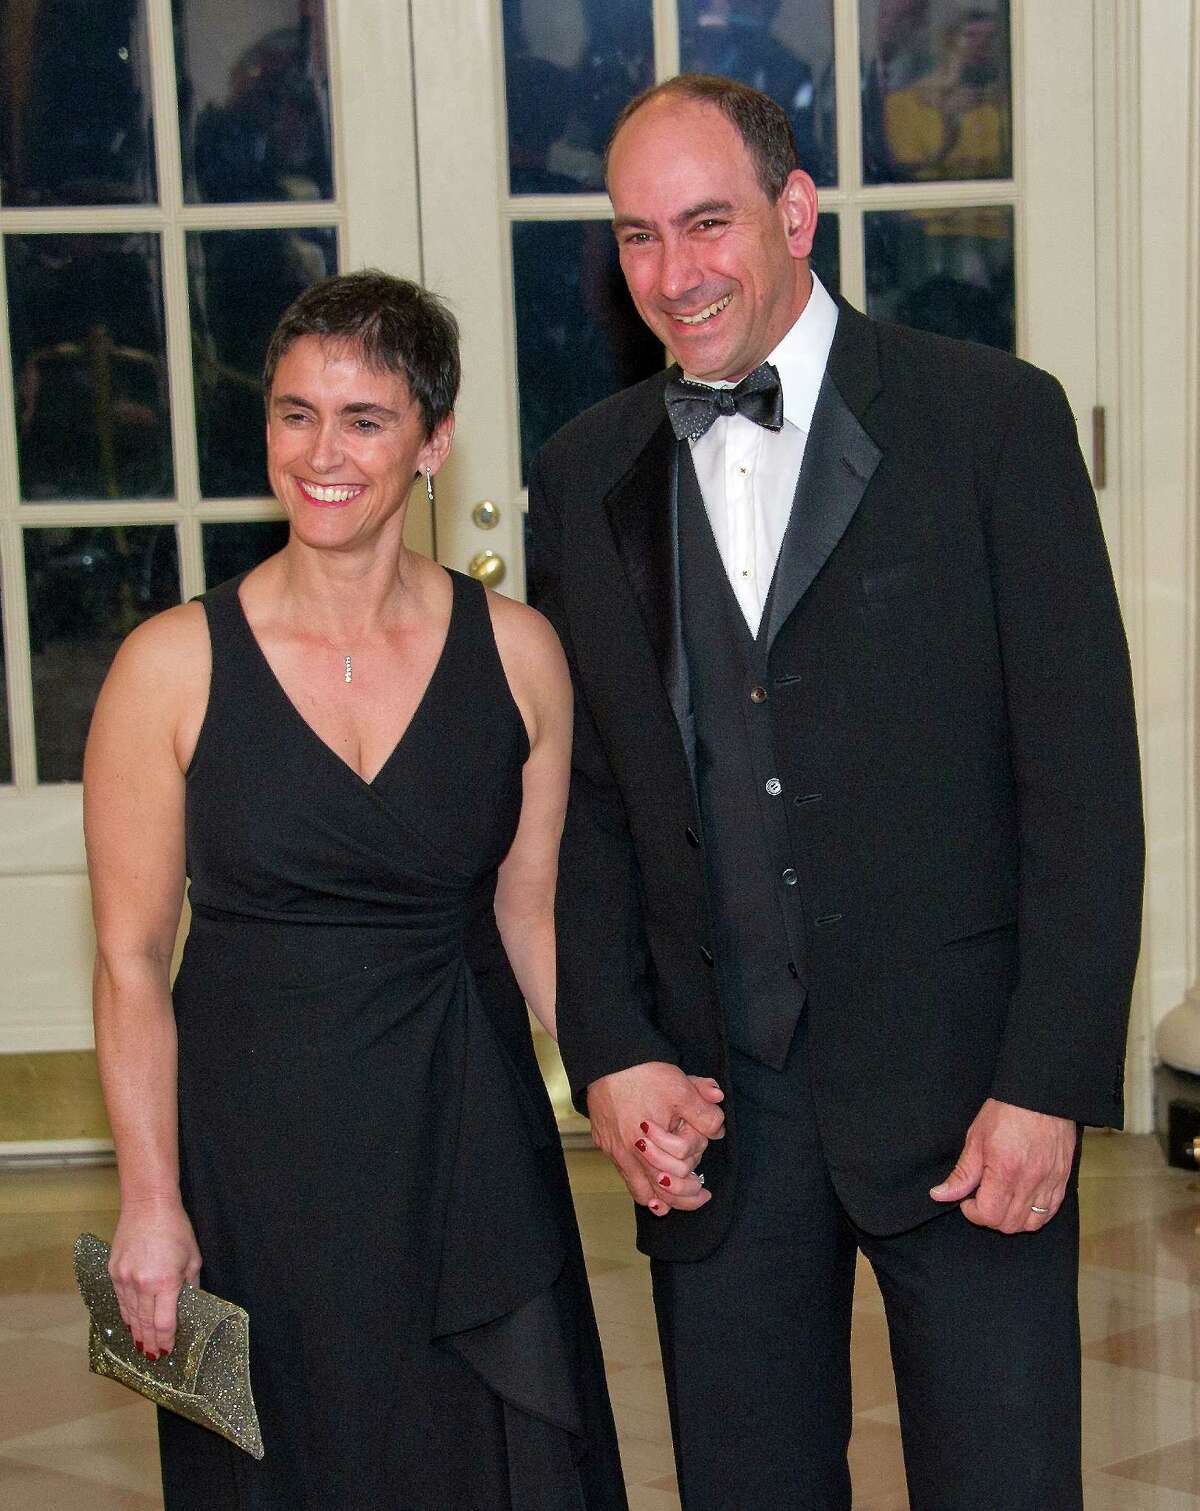 WASHINGTON, DC - MARCH 10: Philanthropist Naomi Aberly and Larry Lebowitz arrives arrive for the State Dinner in honor of Prime Minister Trudeau and First Lady Sophie Trudeau of Canada at the White House March 10, 2016 in Washington, DC. Hosted by President and First Lady Obama, the dinner is in honor of Prime Minister Justin Trudeau and Sophie Gregoire Trudeau of Canada.